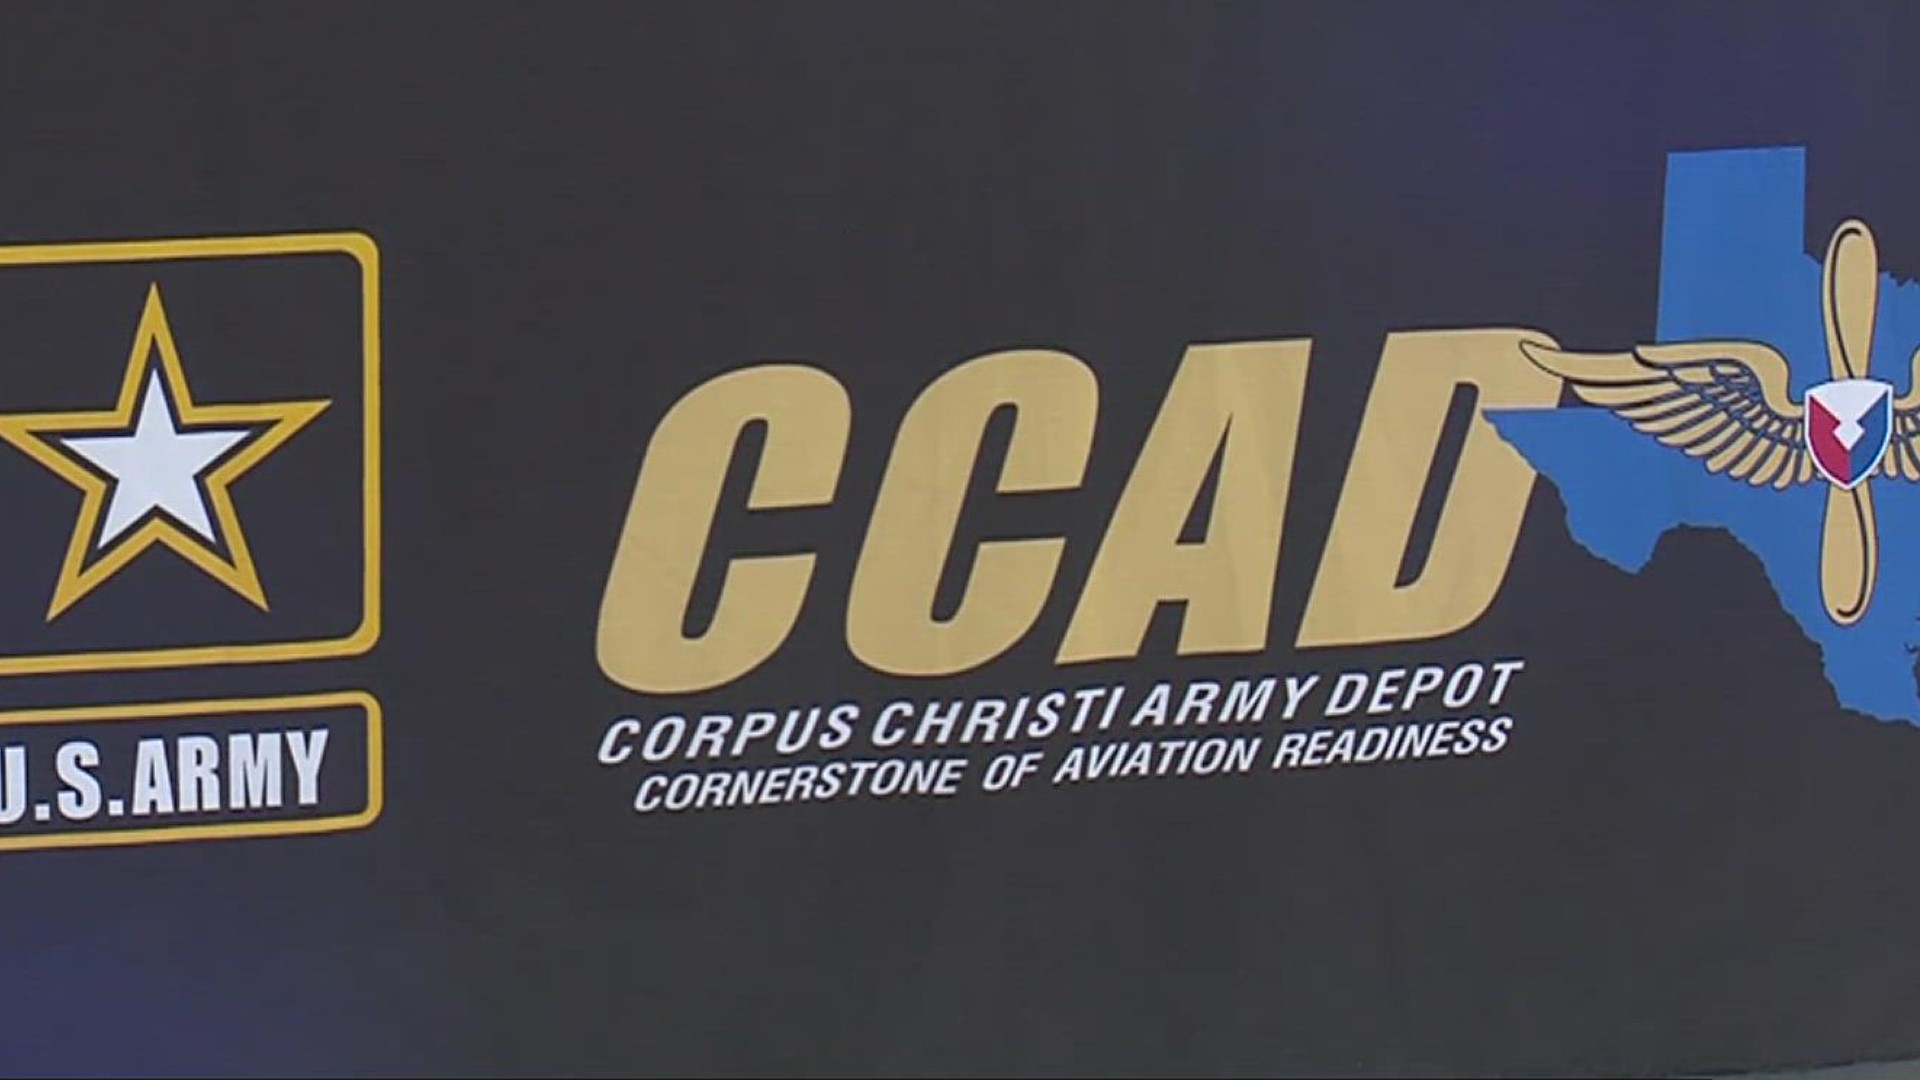 The Corpus Christi Army Depot, Del Mar College, the Island University and the Craft Training Center joined in an effort to put more people to work.